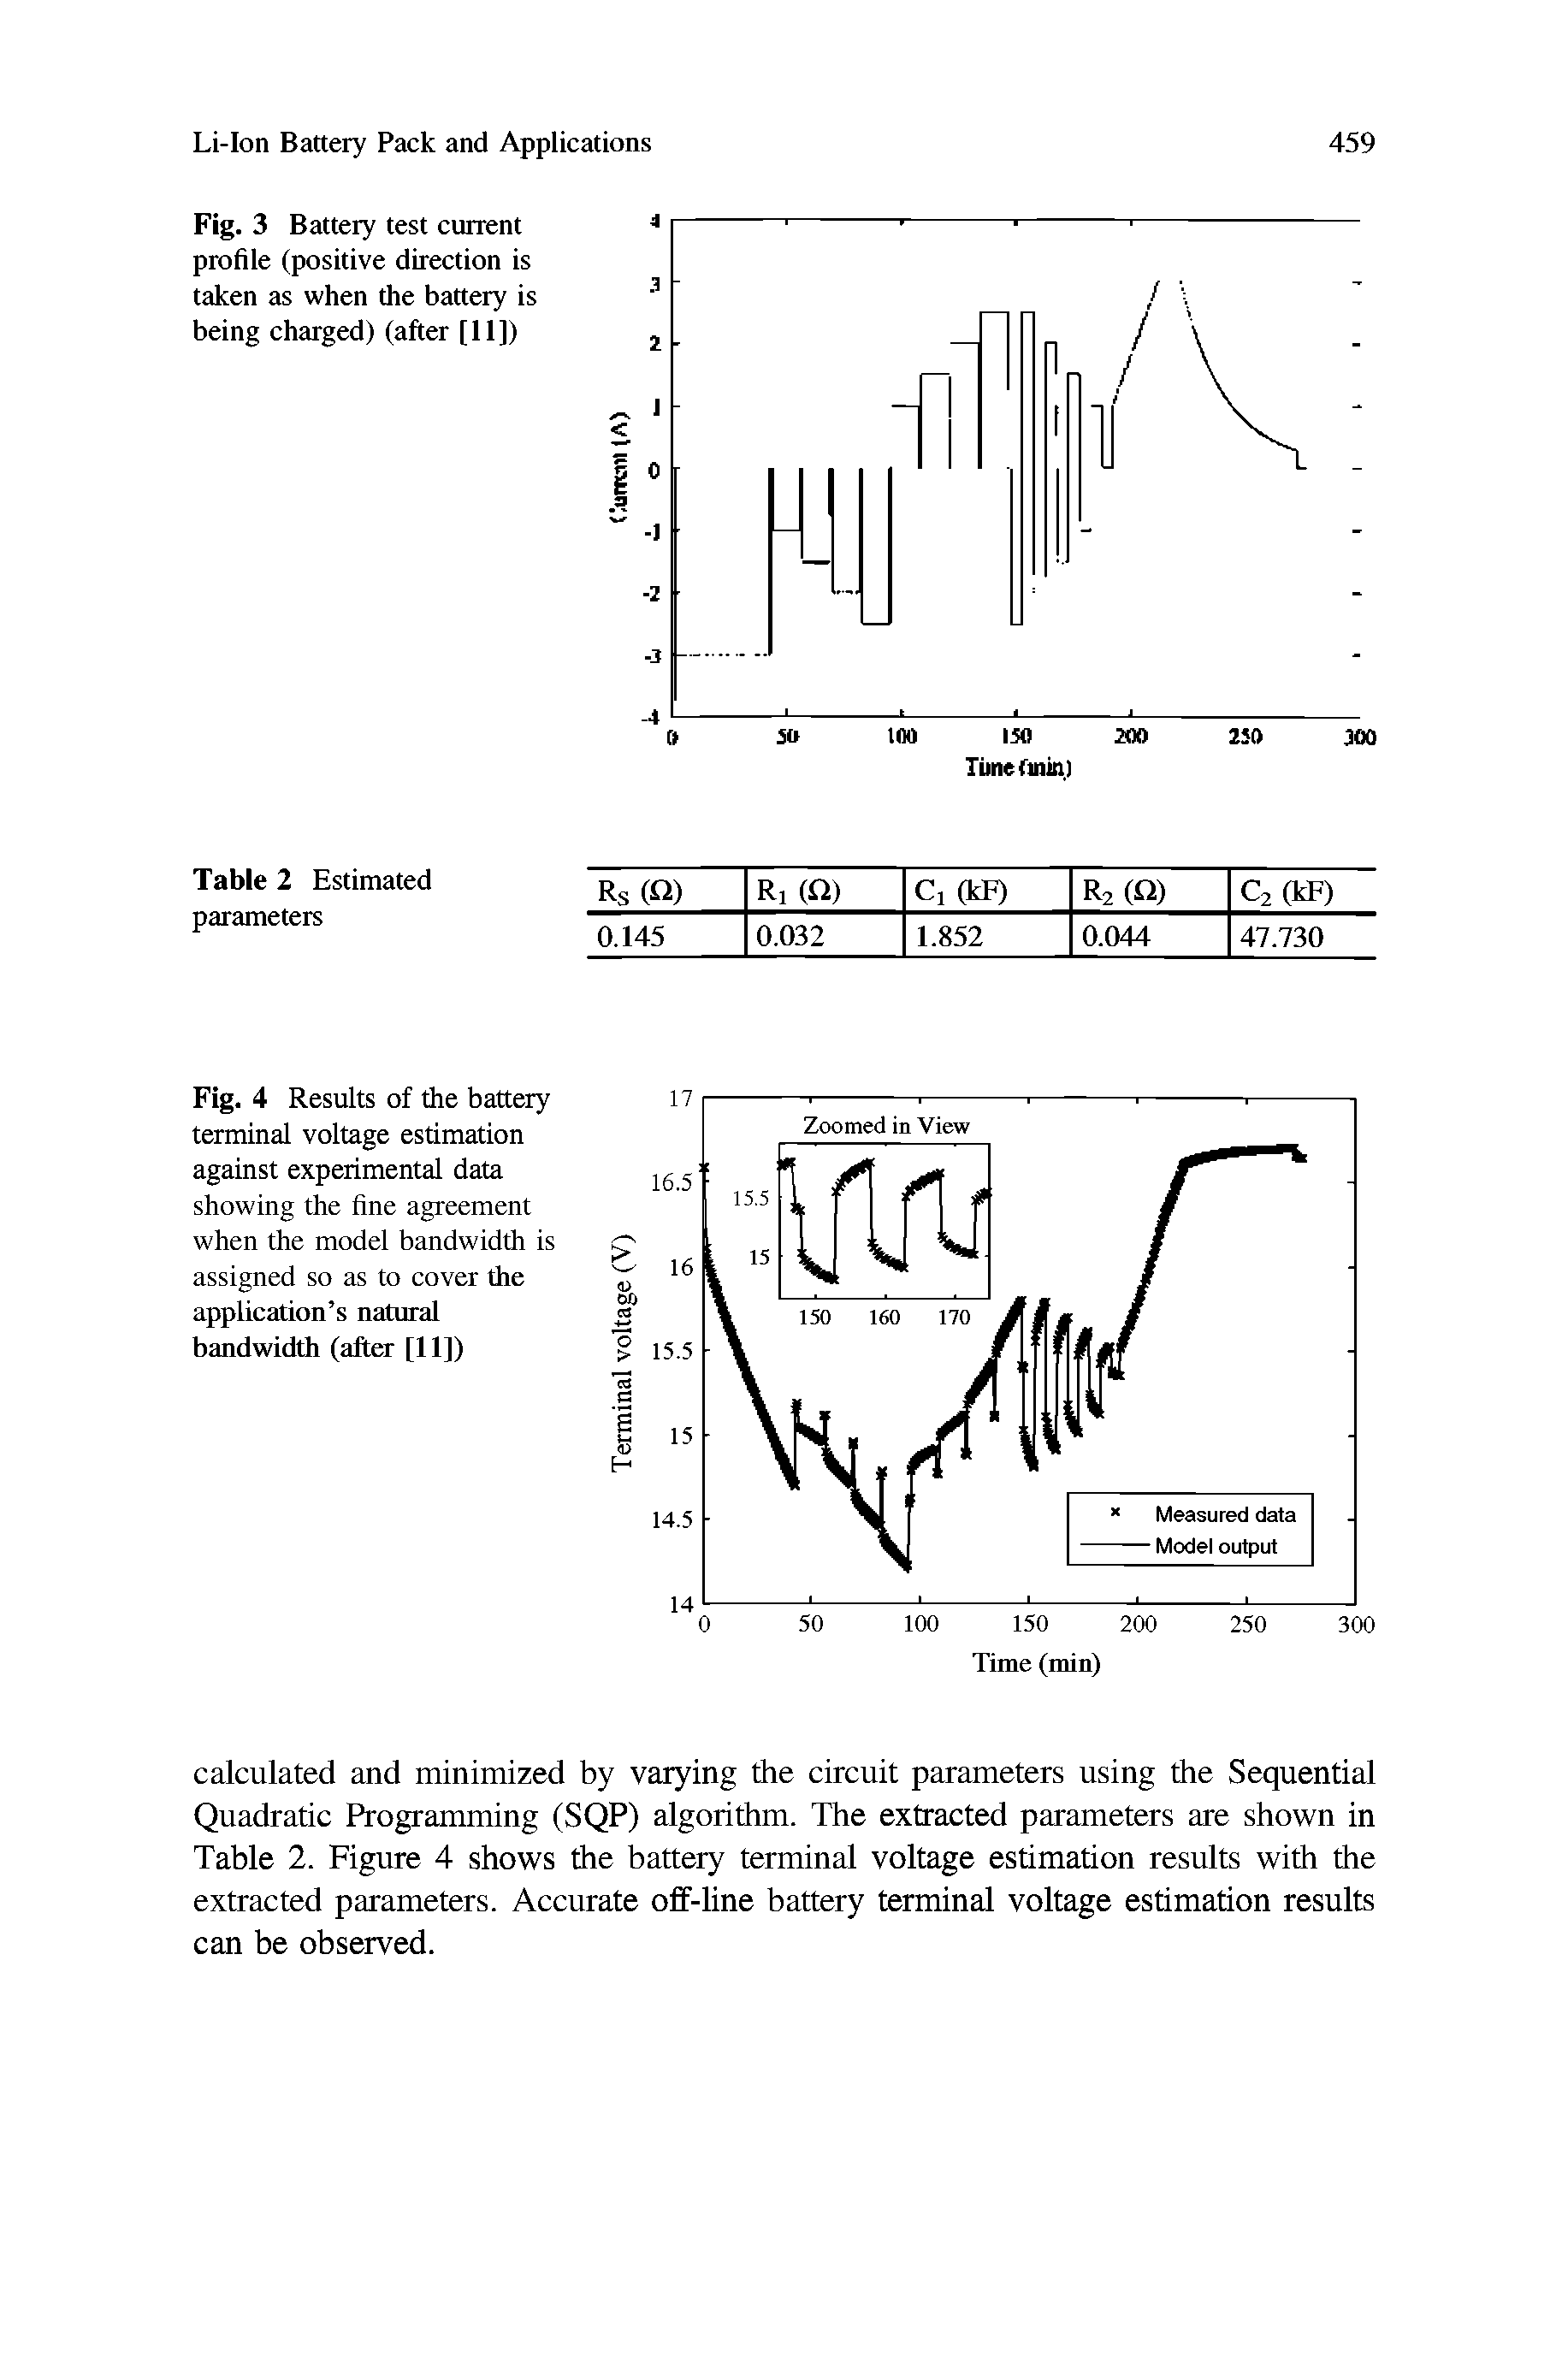 Fig. 4 Results of the battery terminal voltage estimation against experimental data showing the fine agreement when the model bandwidth is assigned so as to cover the application s natural bandwidth (after [11])...